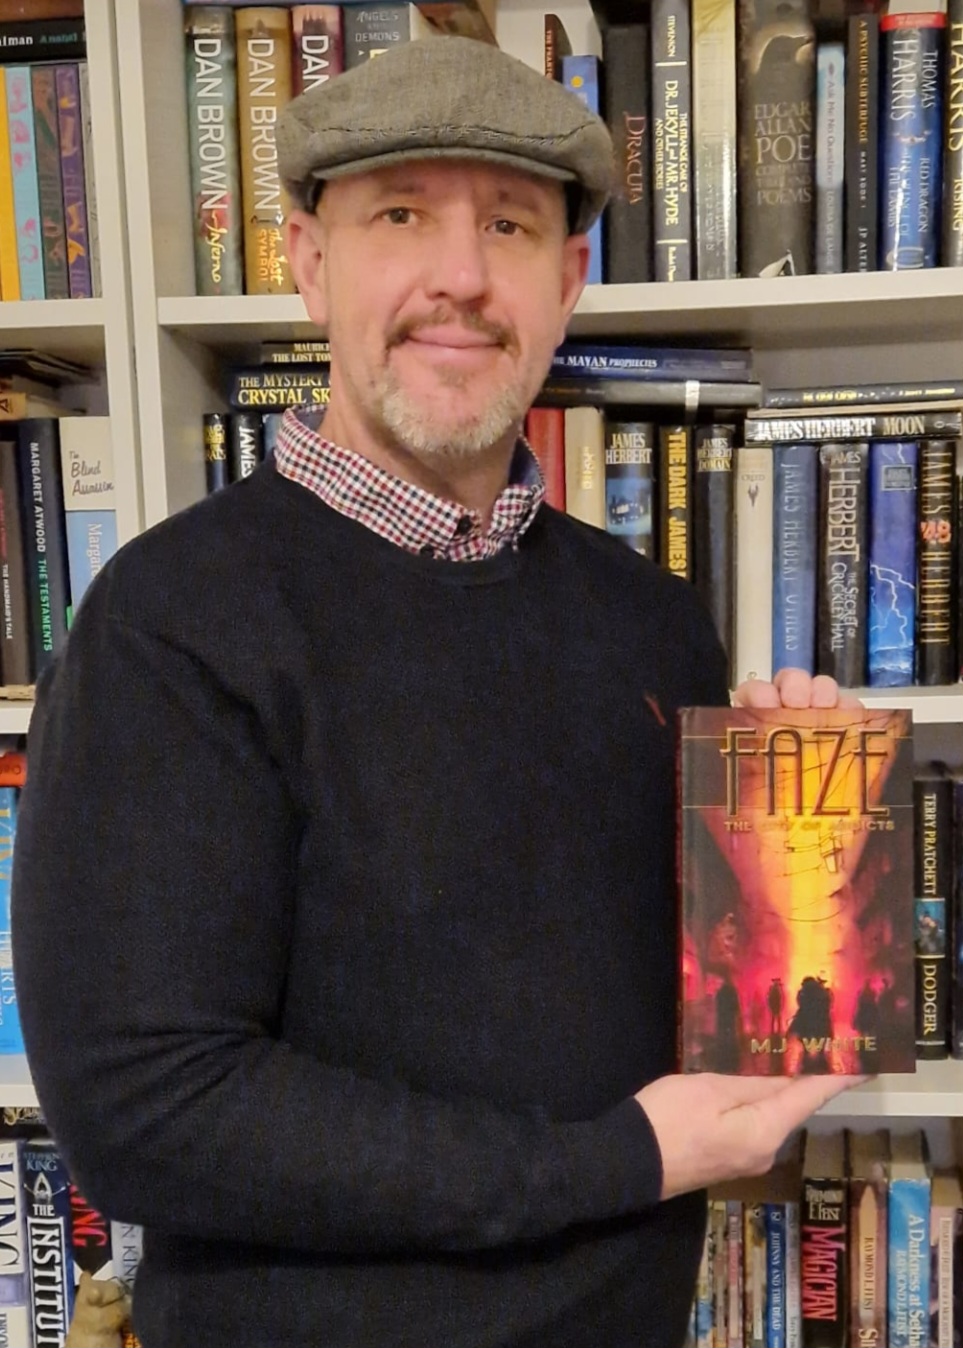 Man wearing flat cap holding up a book while standing front of a bookcase